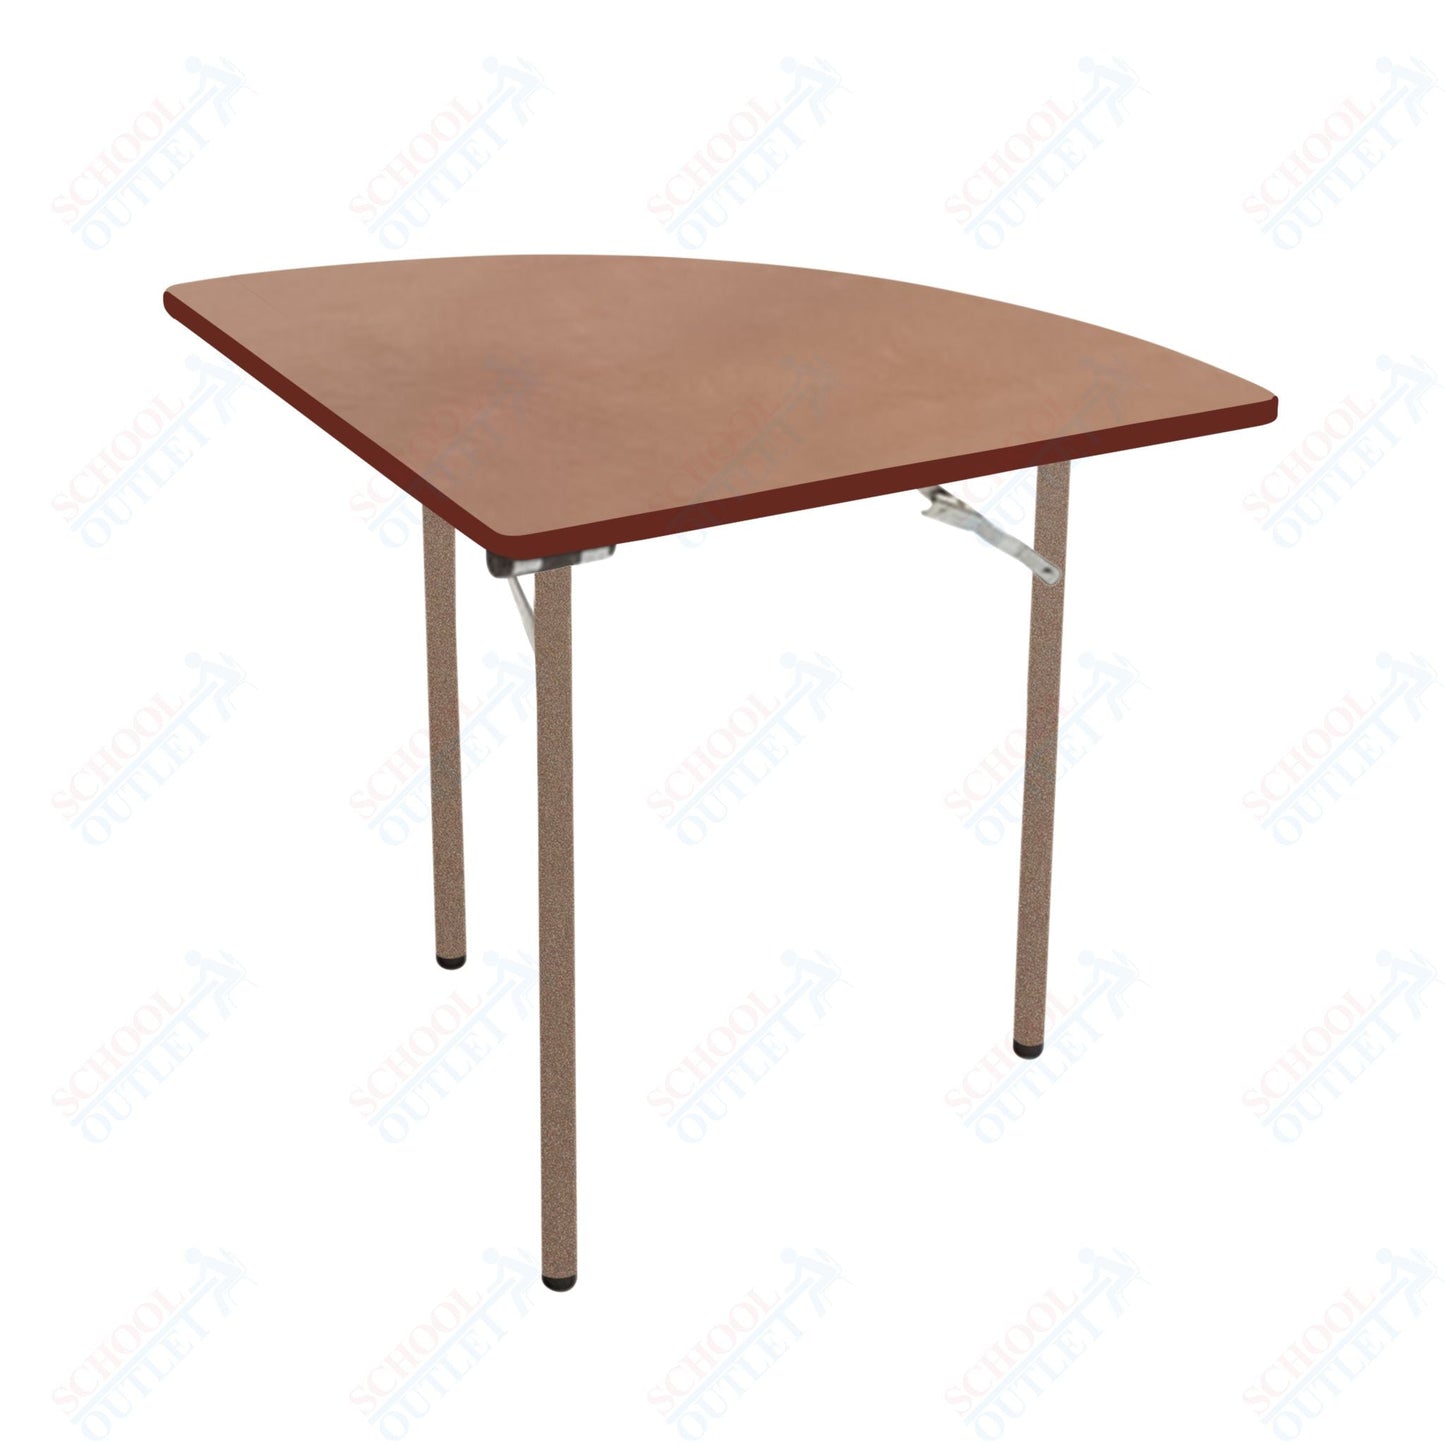 AmTab Folding Table - Plywood Stained and Sealed - Vinyl T - Molding Edge - Quarter Round - Quarter 72" Diameter x 29"H (AmTab AMT - QR72PM) - SchoolOutlet